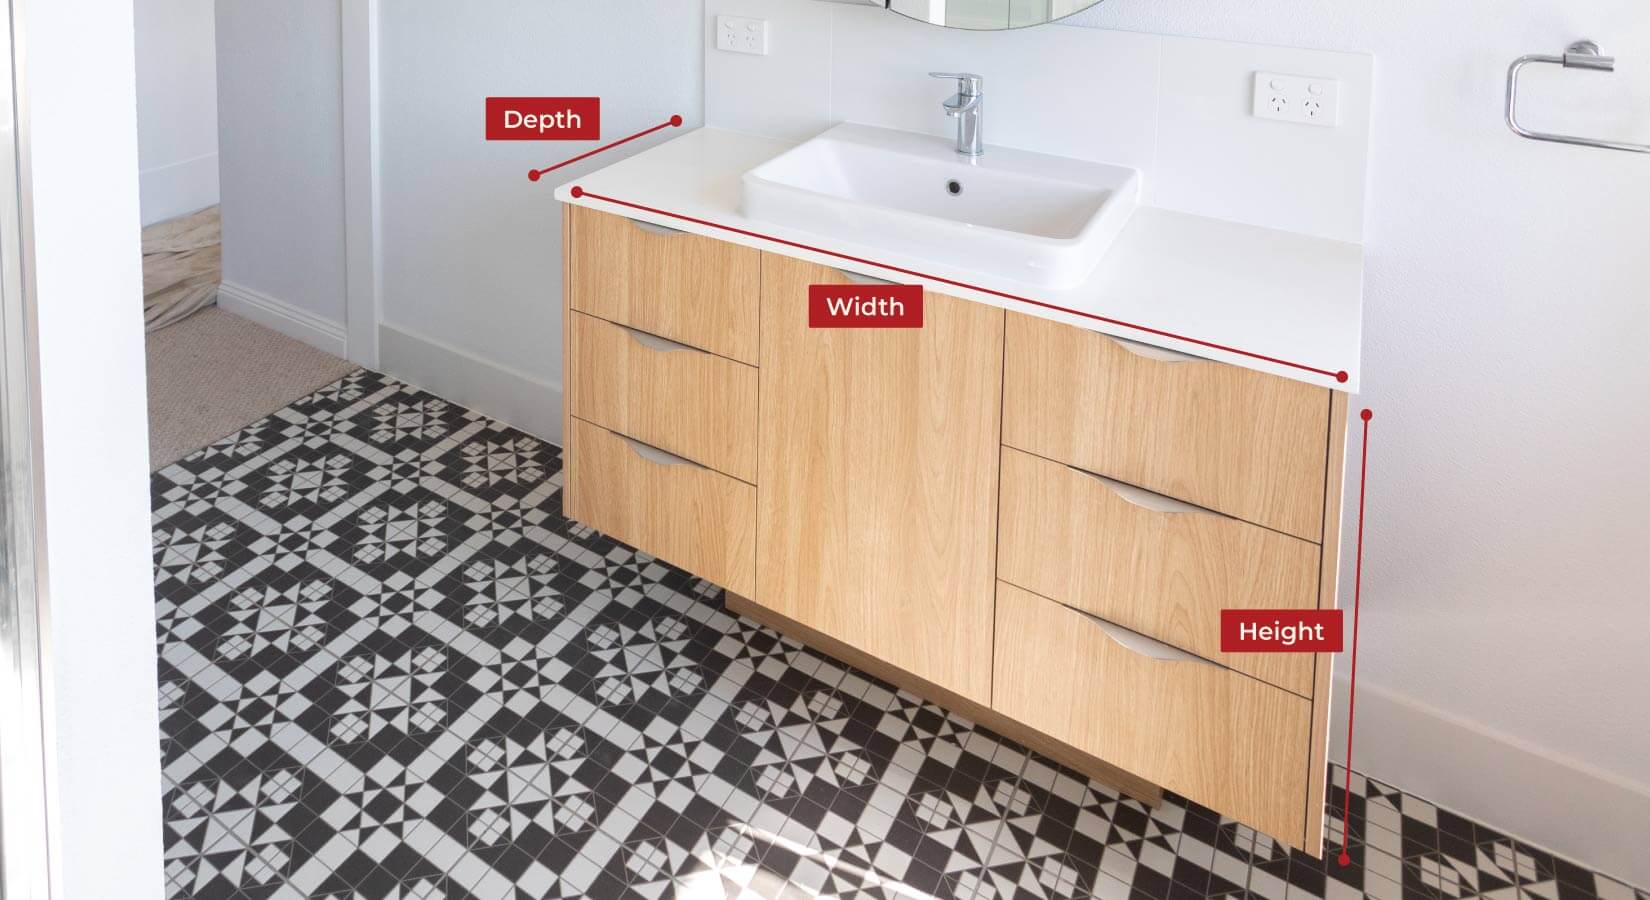 Light wood bathroom vanity with labels for depth, width, and height.